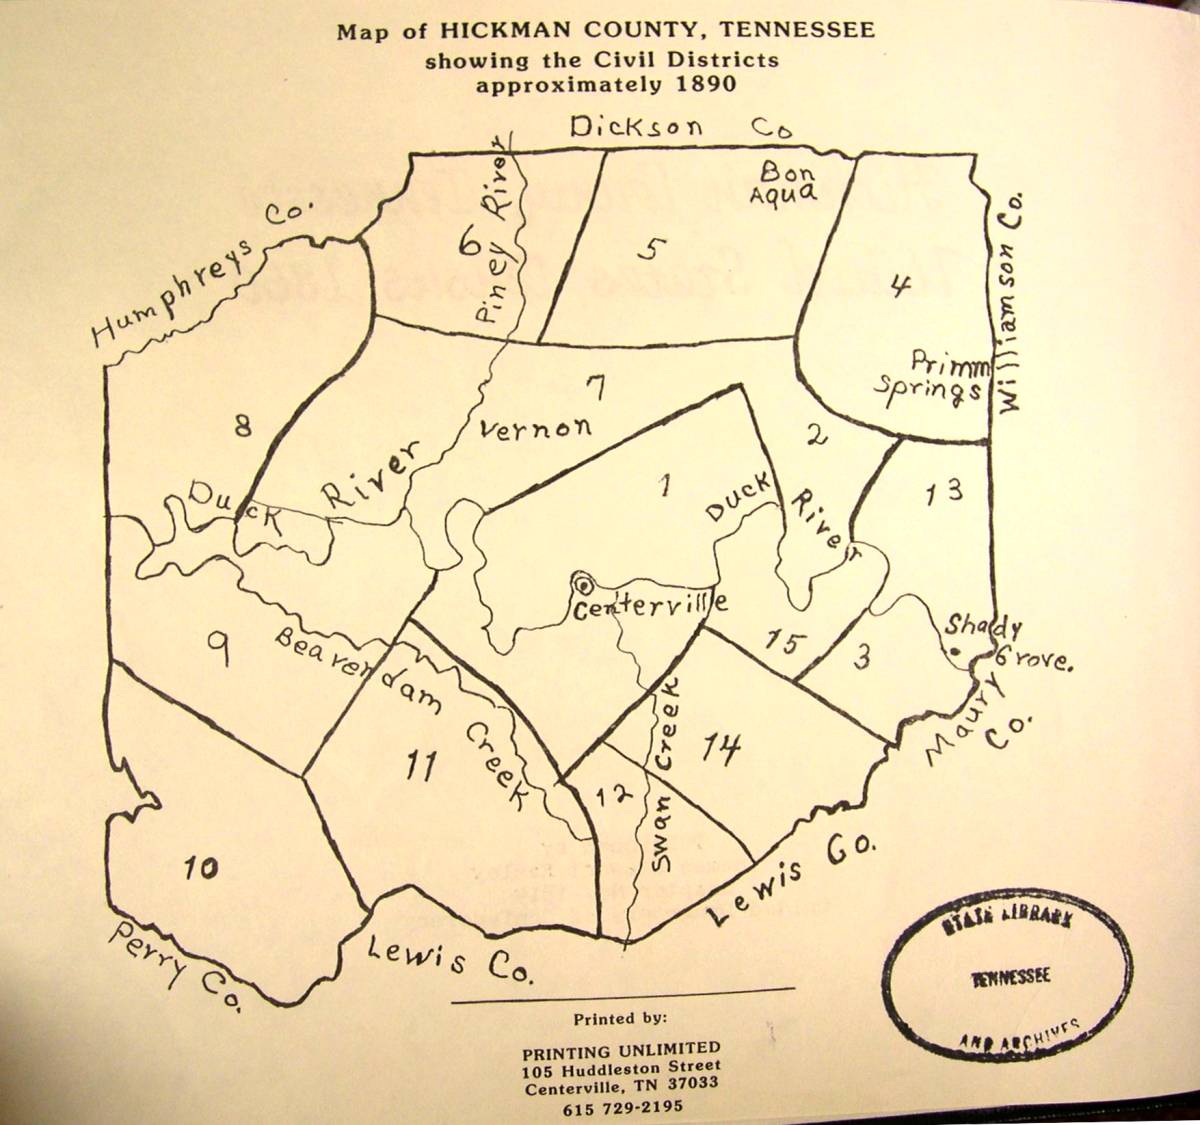 Civil Districts, Hickman County, Tennessee, 1890
